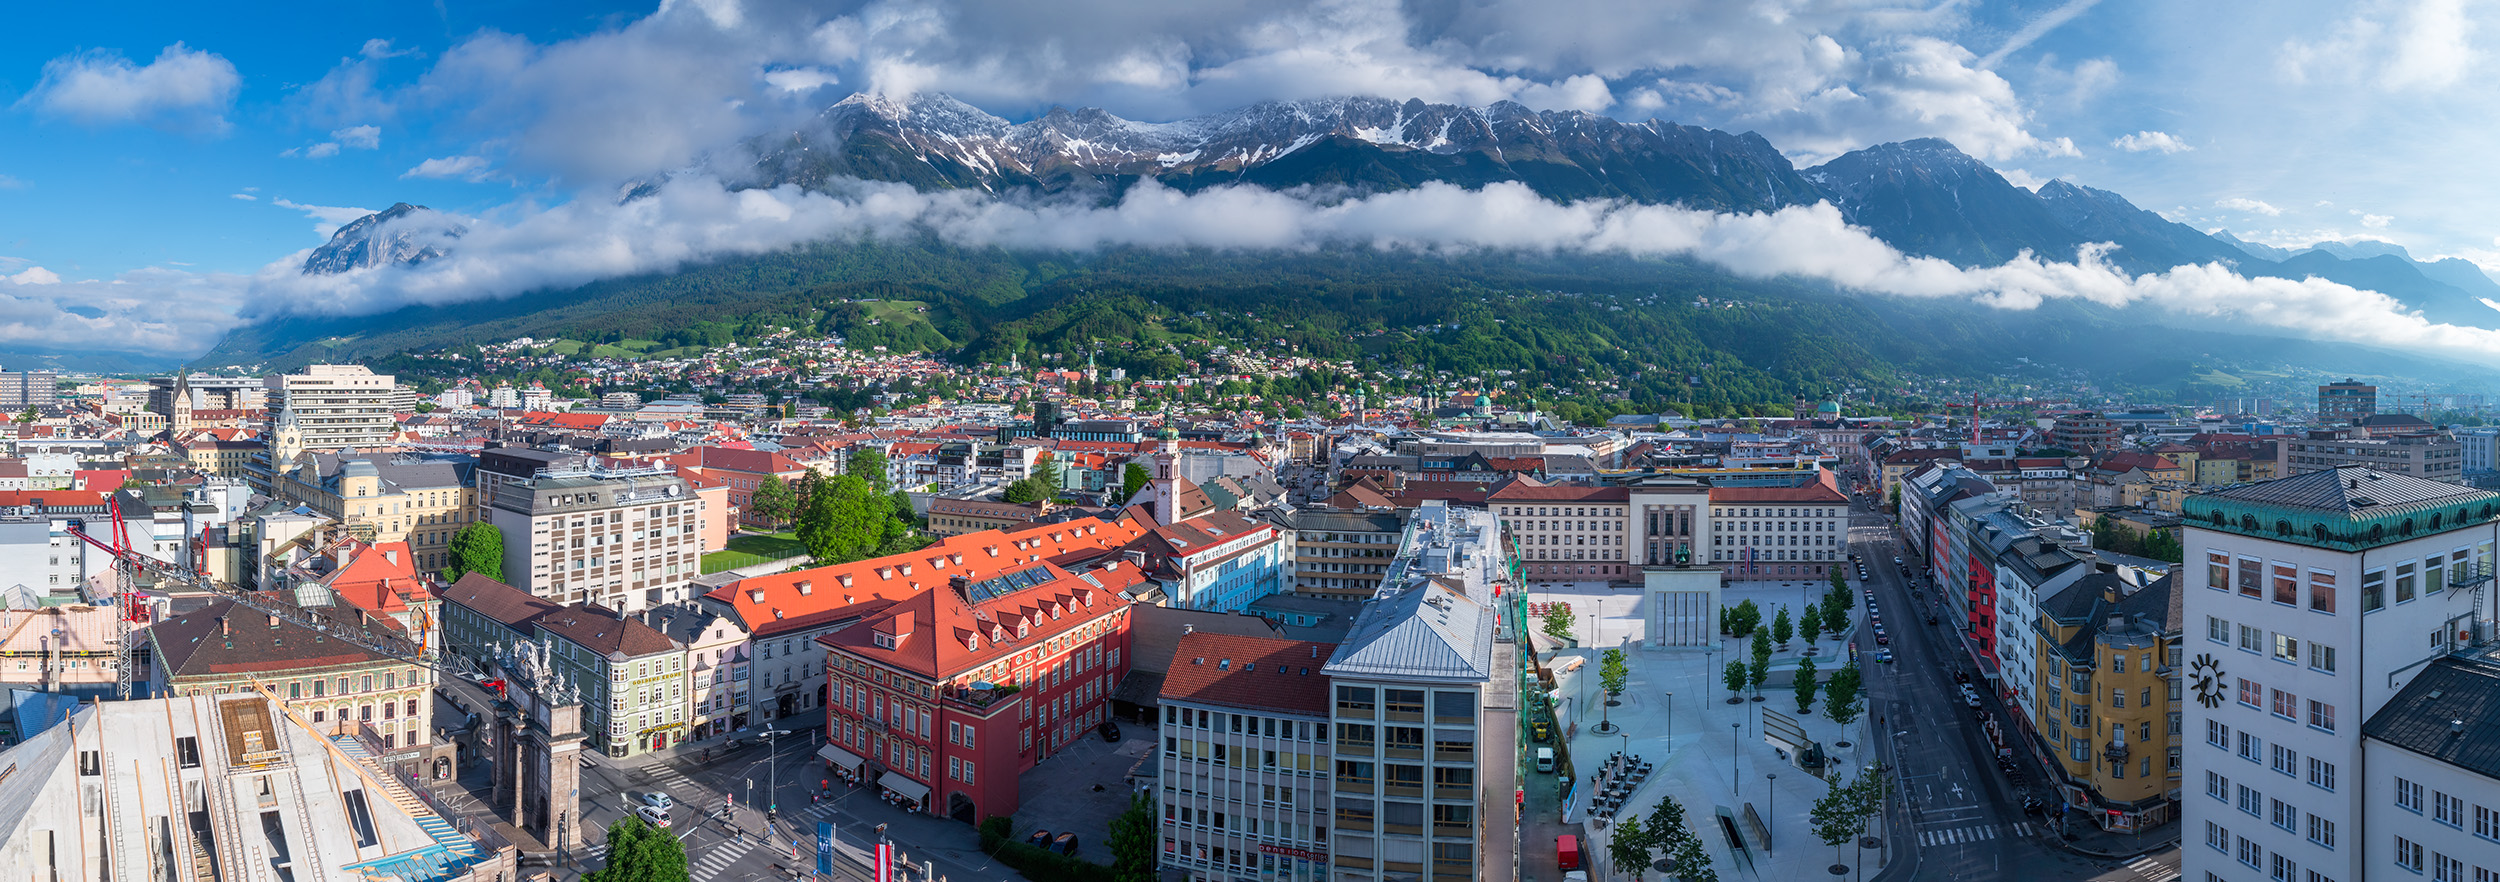 "Innsbruck's Enveloping Skies" captures a breathtaking moment as a photographer seizes the opportunity presented by the dramatic...